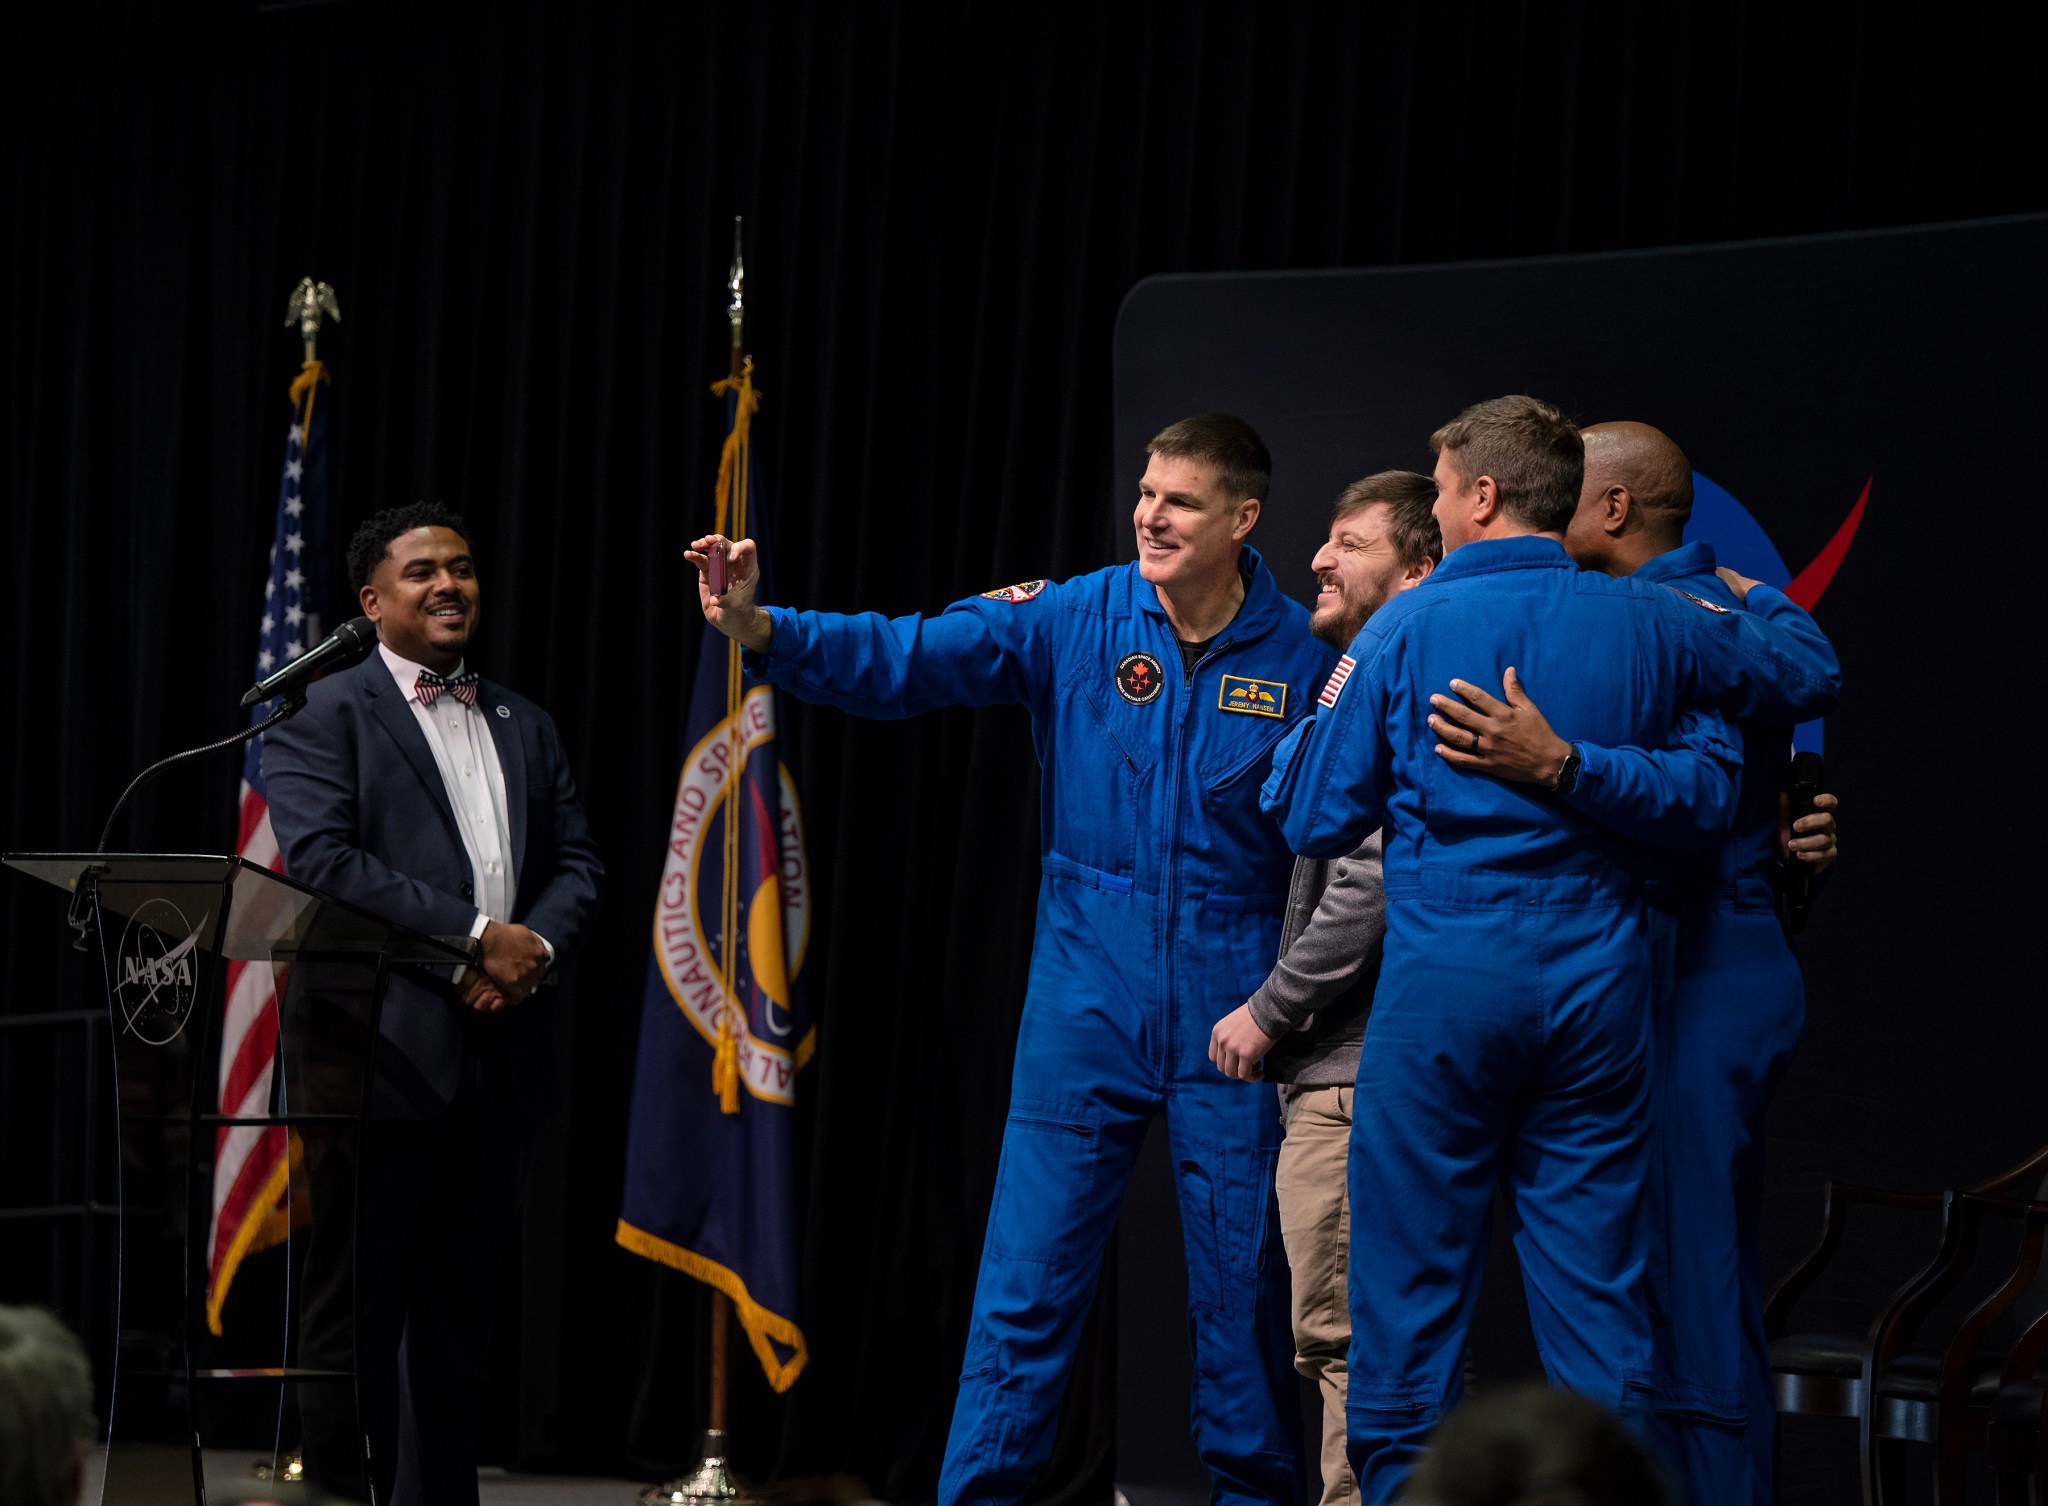 Corey Walker, an atmospheric science programmer at Marshall with Jacobs, smiles with the astronauts as they record a video wishing Walker’s grandmother, Brenda Lowery, merry Christmas. During a question and answer session with the astronauts, Walker asked if he could get a video of them for his grandmother as a Christmas gift for her. Walker said his grandmother loves the space program. At far left is Lance D. Davis, Marshall’s news chief, who served as moderator for the event.